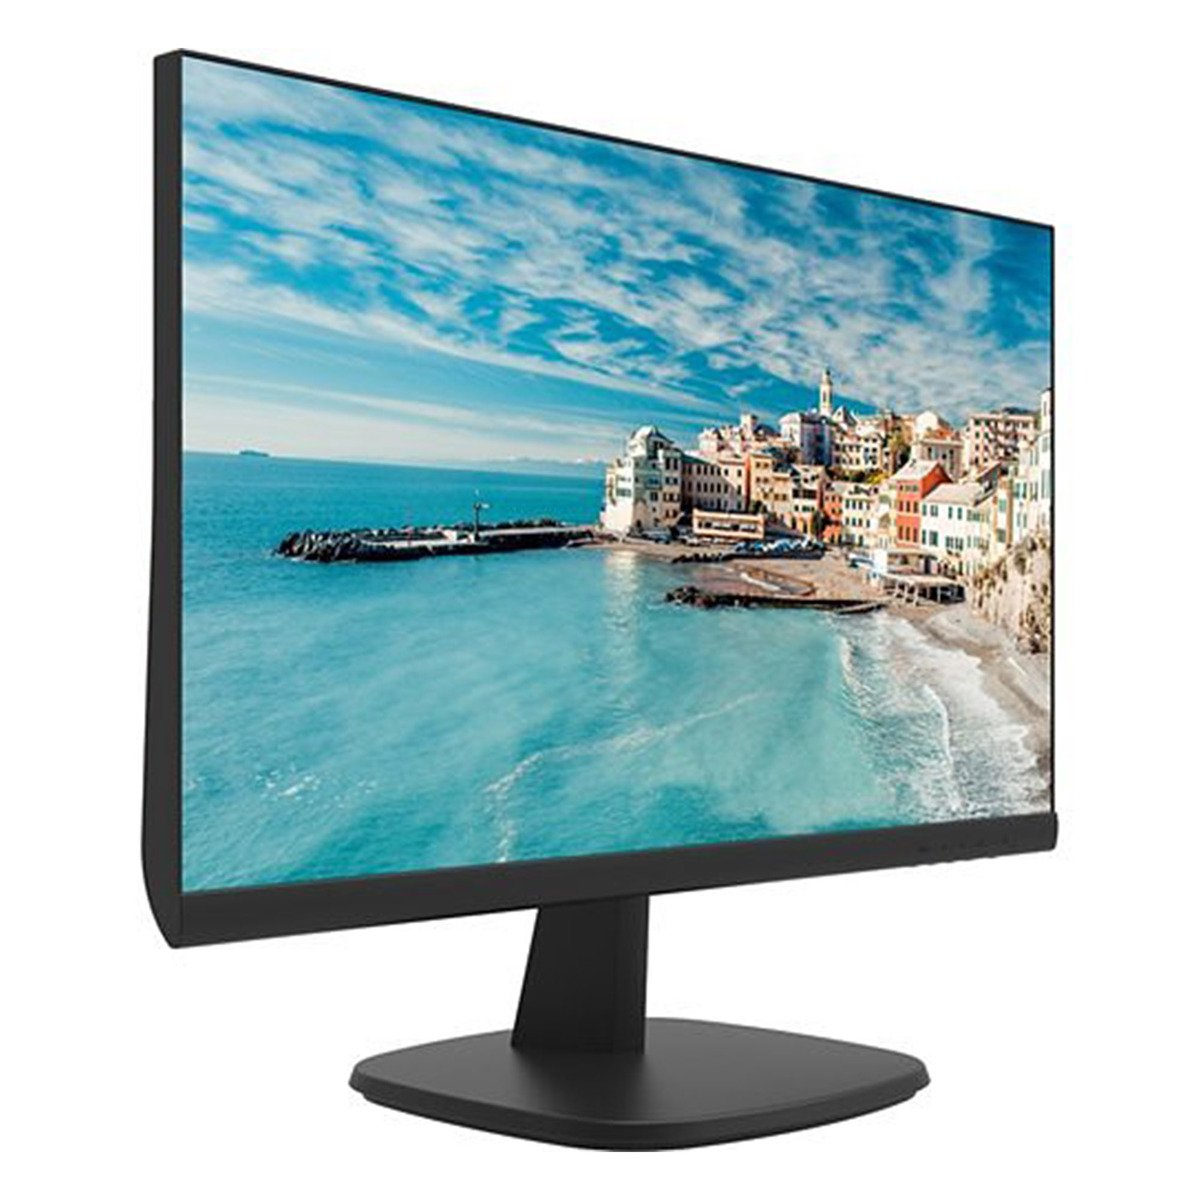 Hikvision FHD Monitor D5024FN 23.8 inch